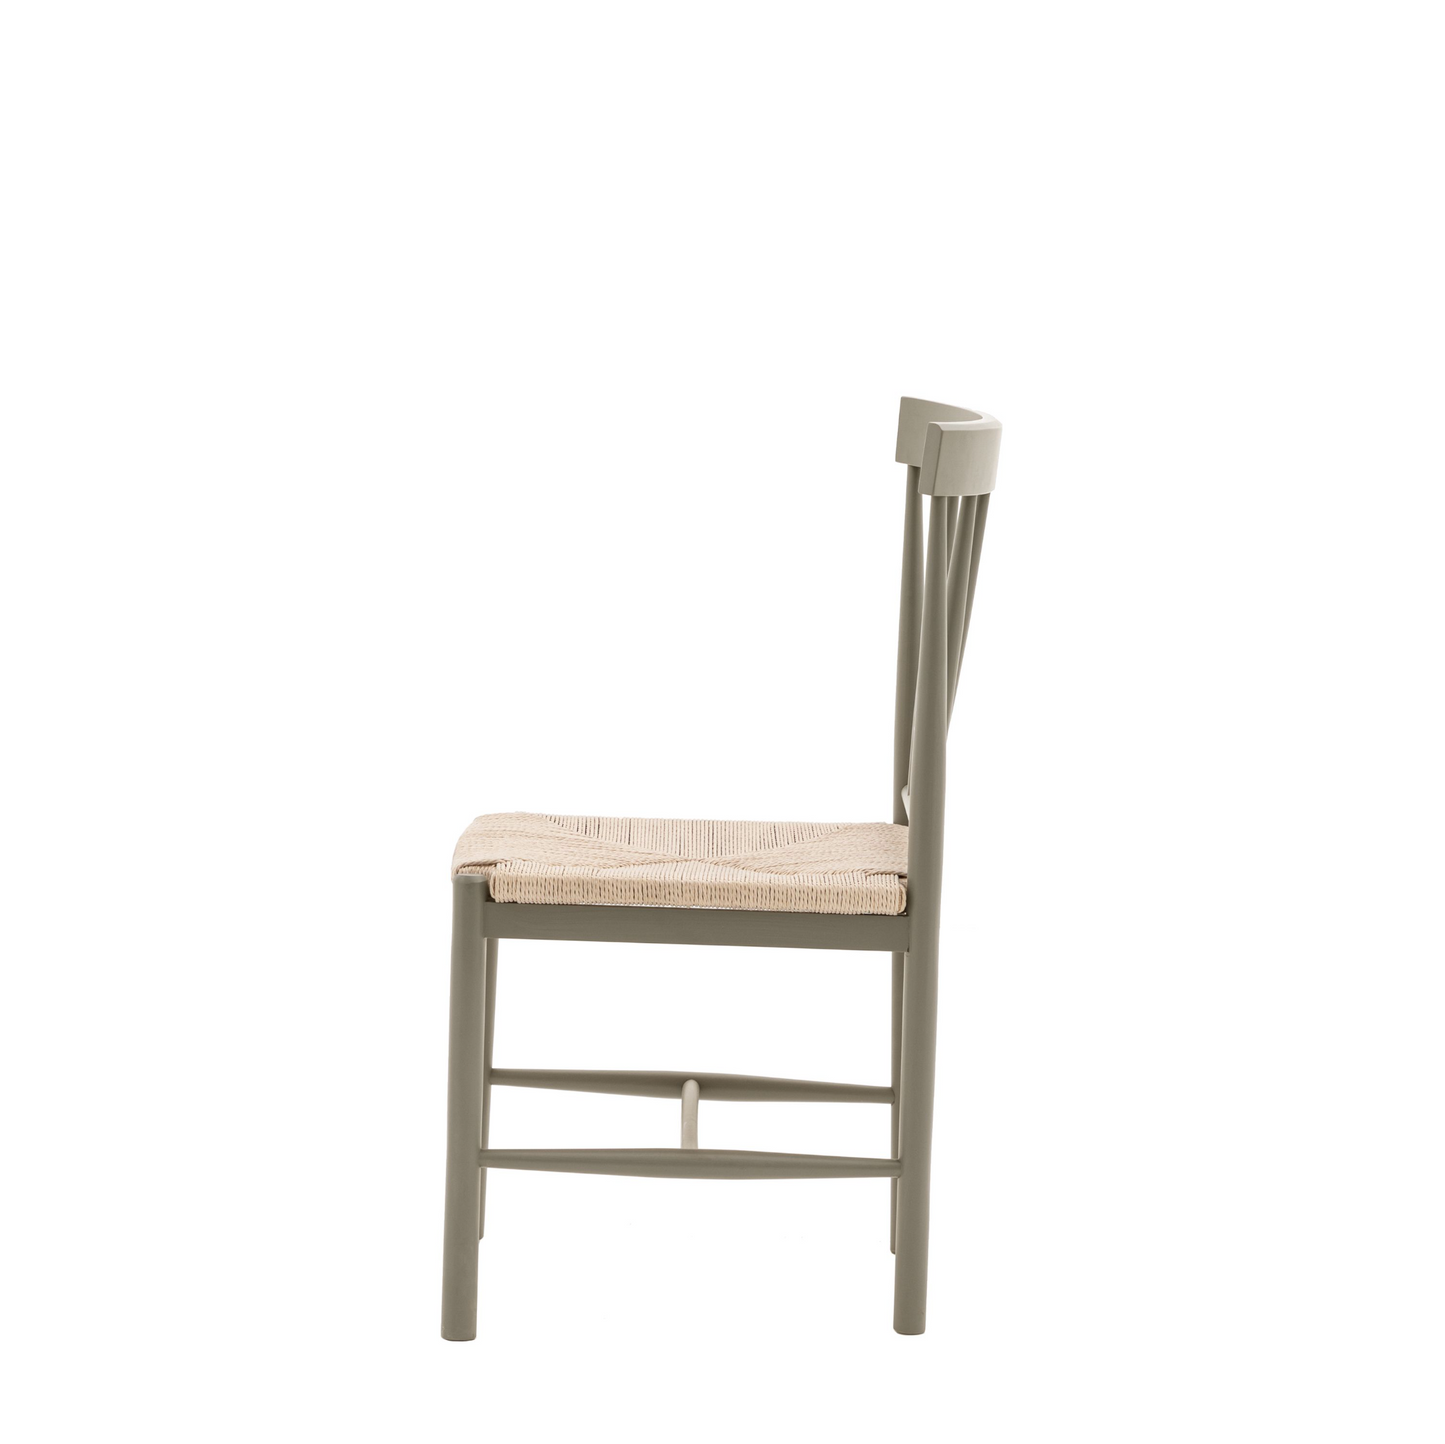 A Buckland Dining Chair 2pk in Prairie, an interior decor product from Kikiathome.co.uk, with a wooden seat against a white background.